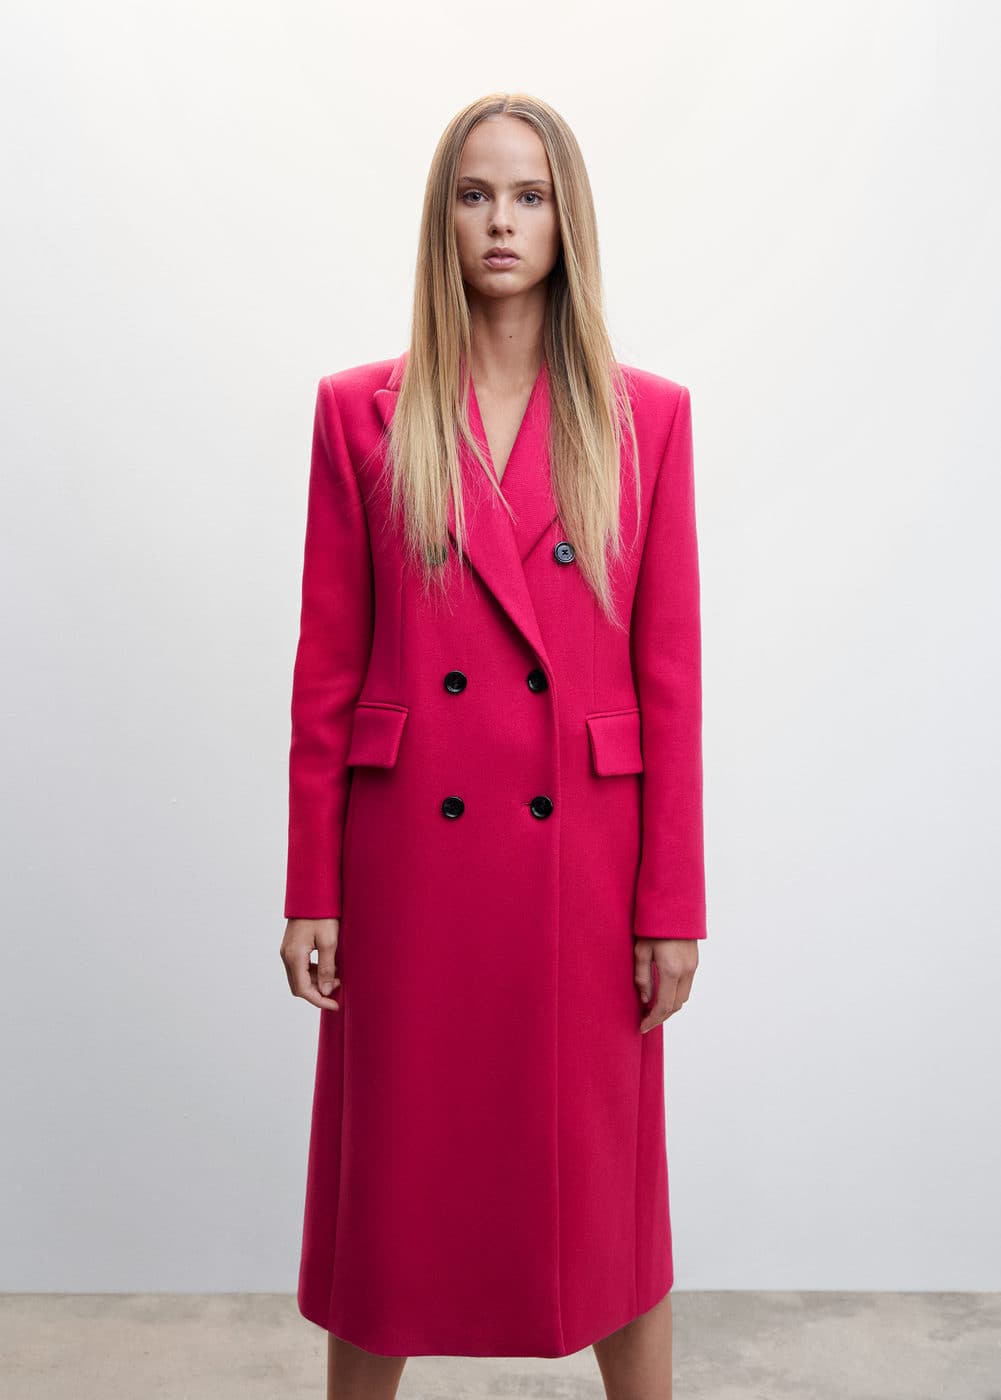 30 Best Colorful Coats That Are Way More Exciting Than Black | Who What ...